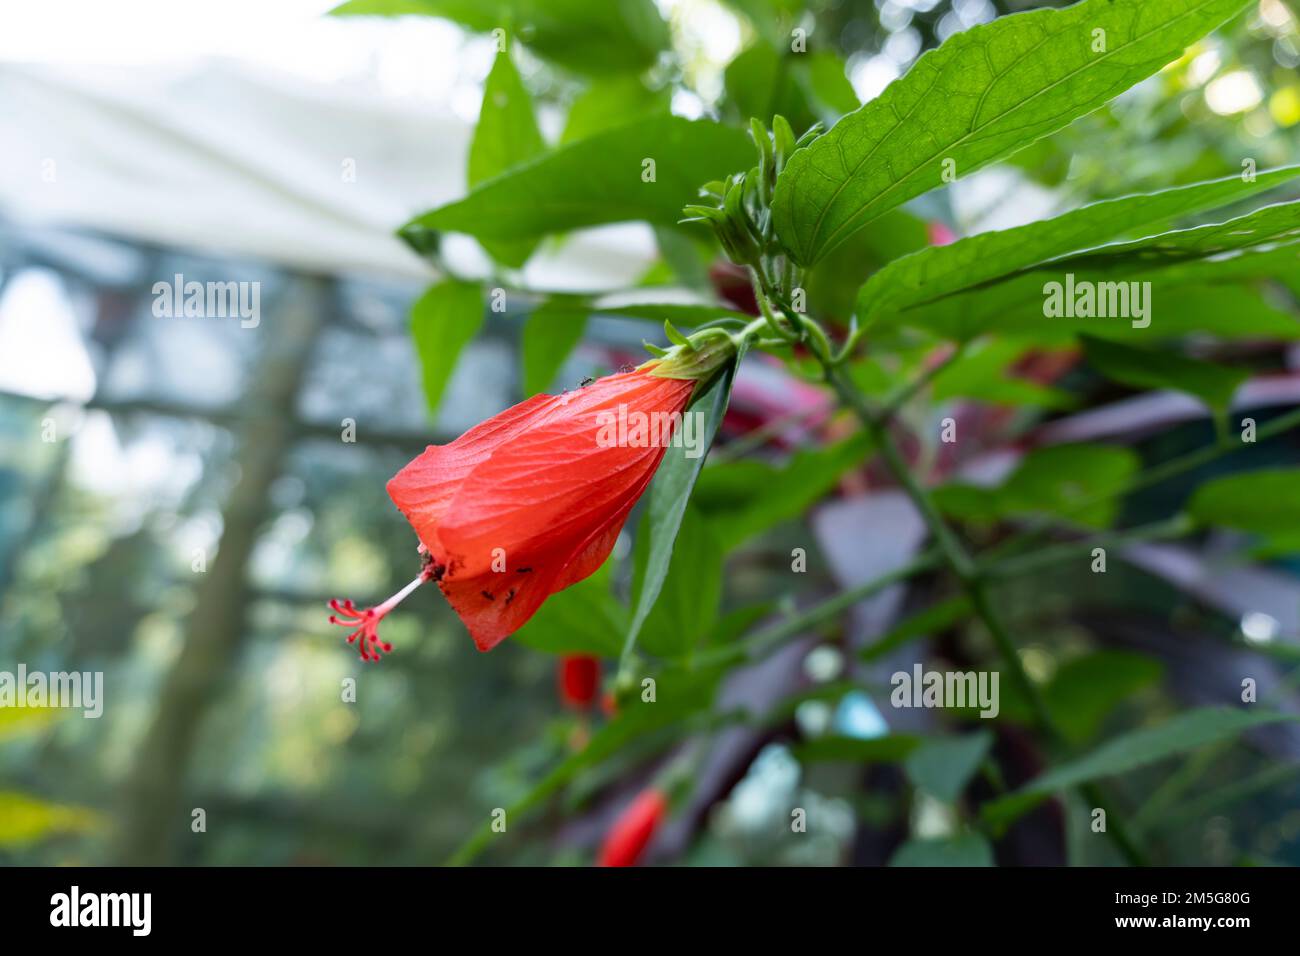 Red hibiscus flowers, blurred background of leaves Stock Photo